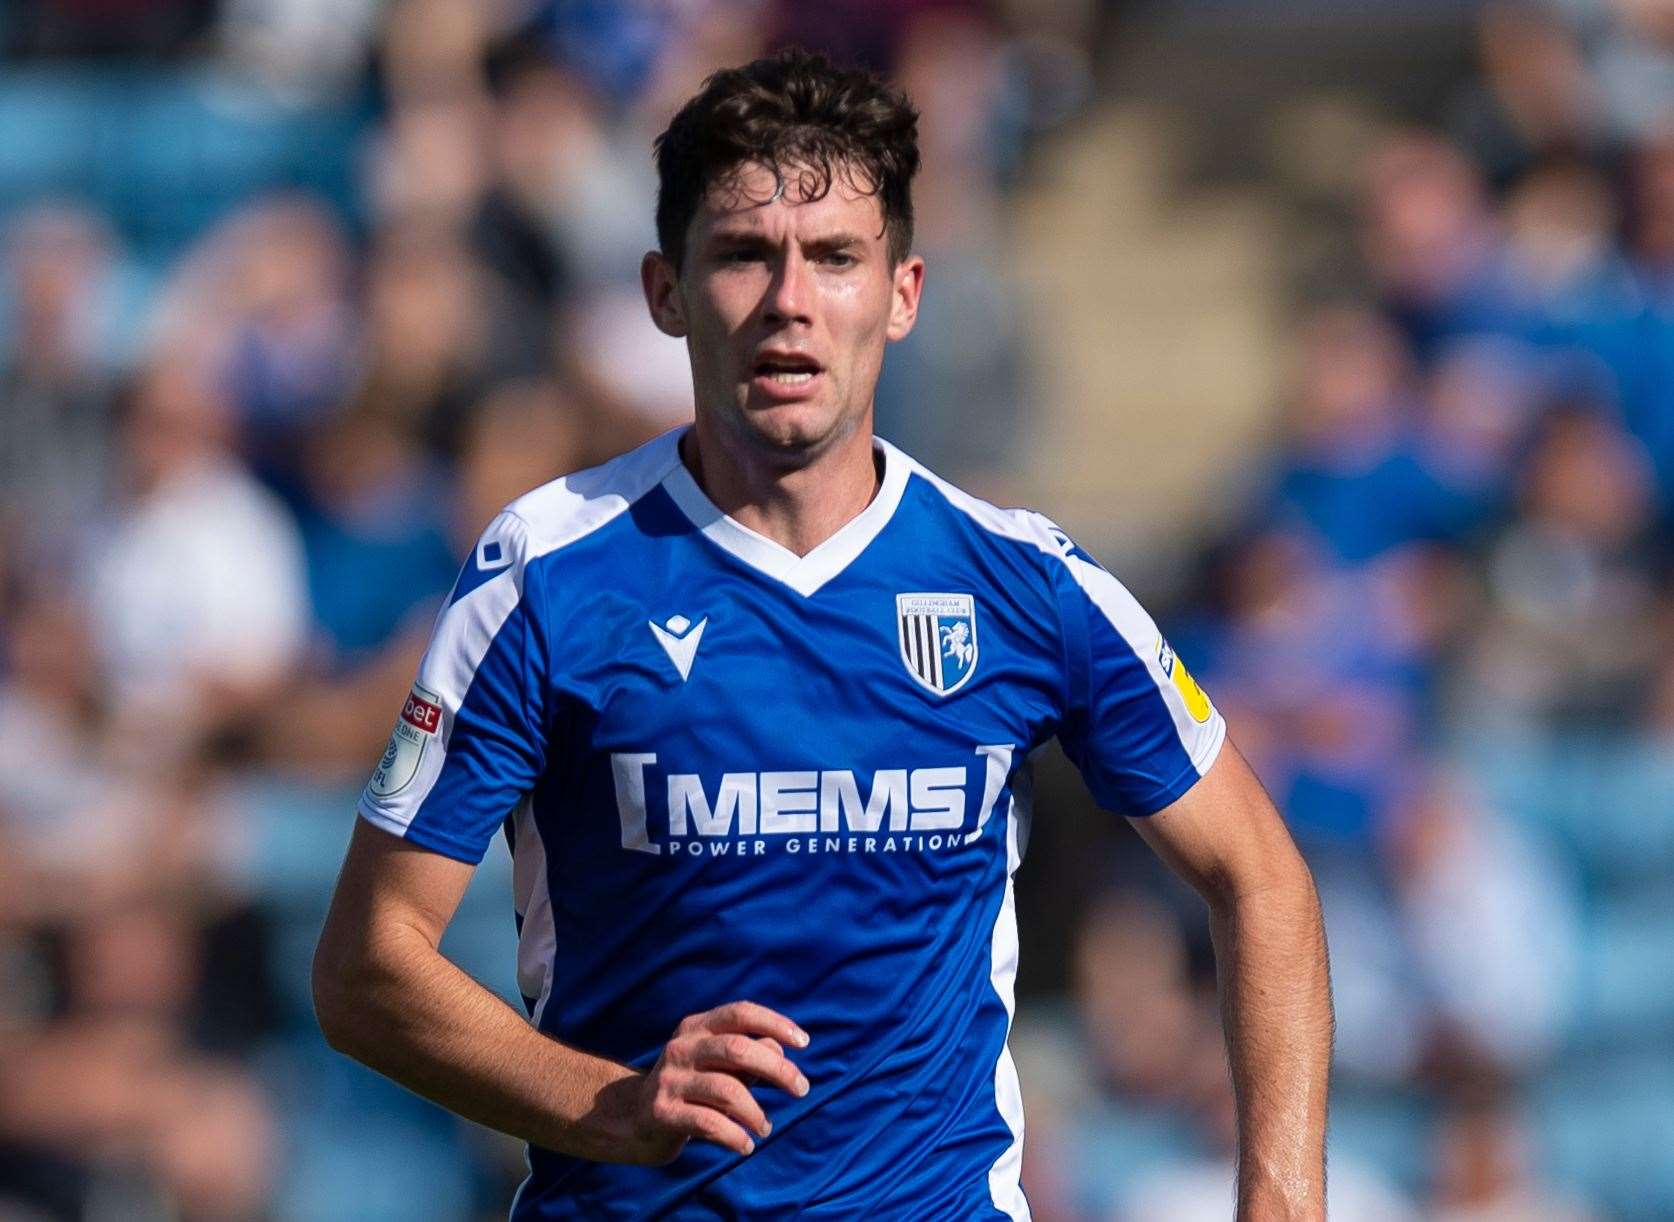 Tom O'Connor gained valuable experience this season with the Gills